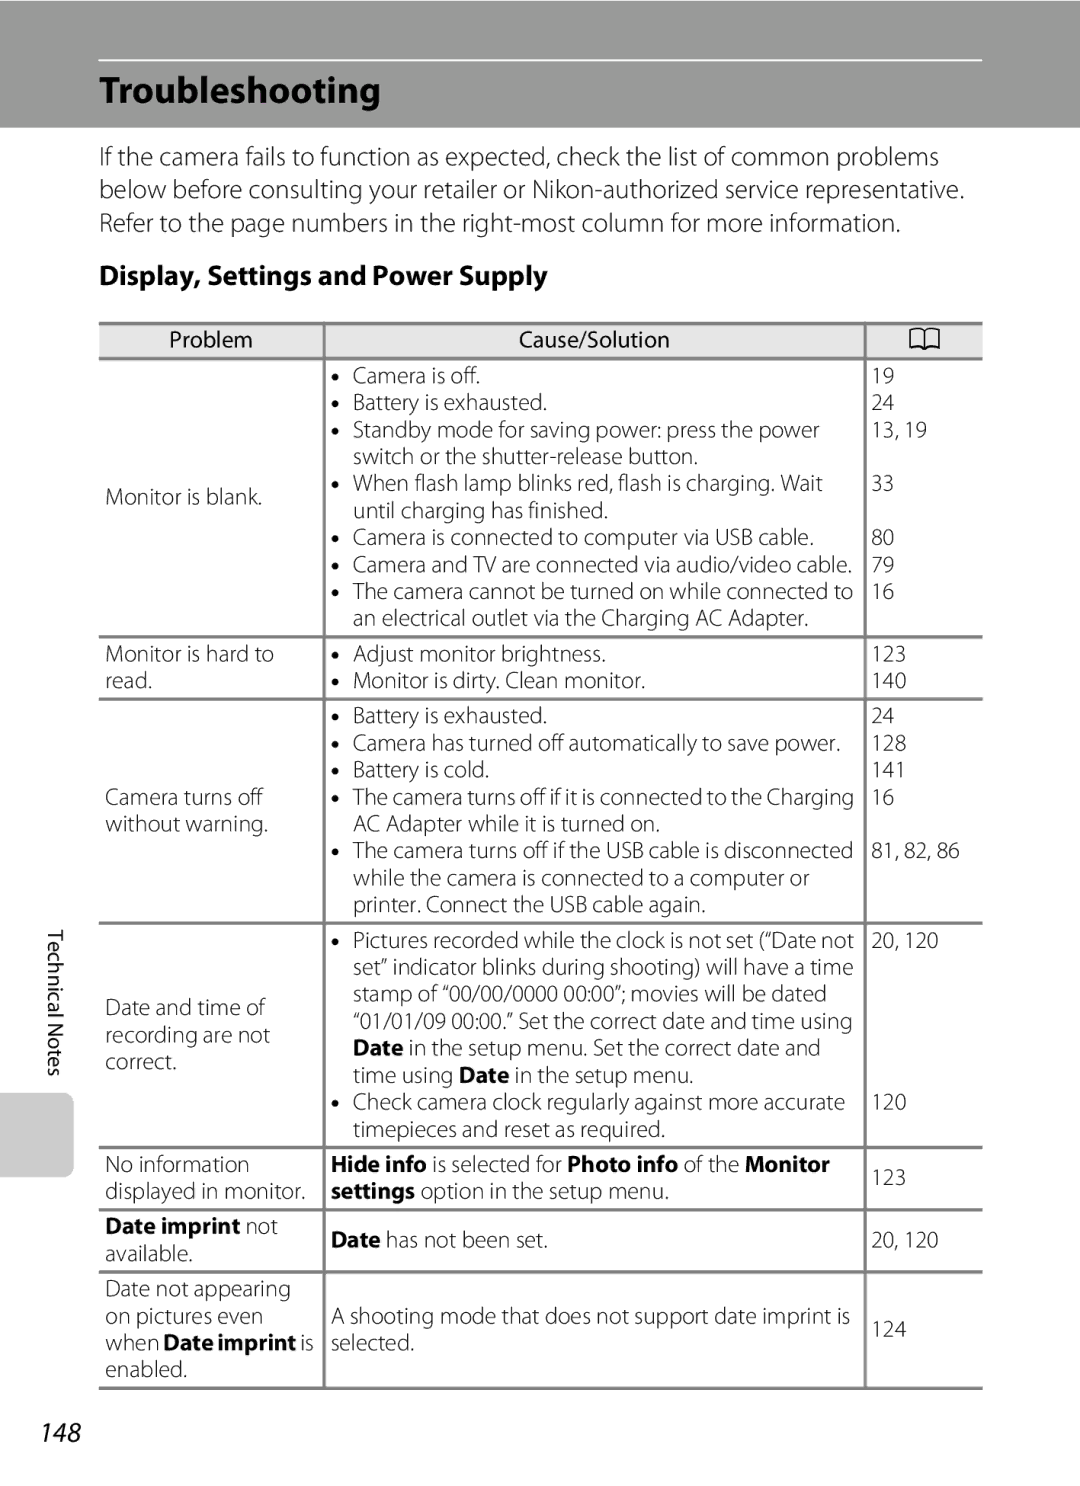 Nortel Networks S640 user manual Troubleshooting, Display, Settings and Power Supply, 148 